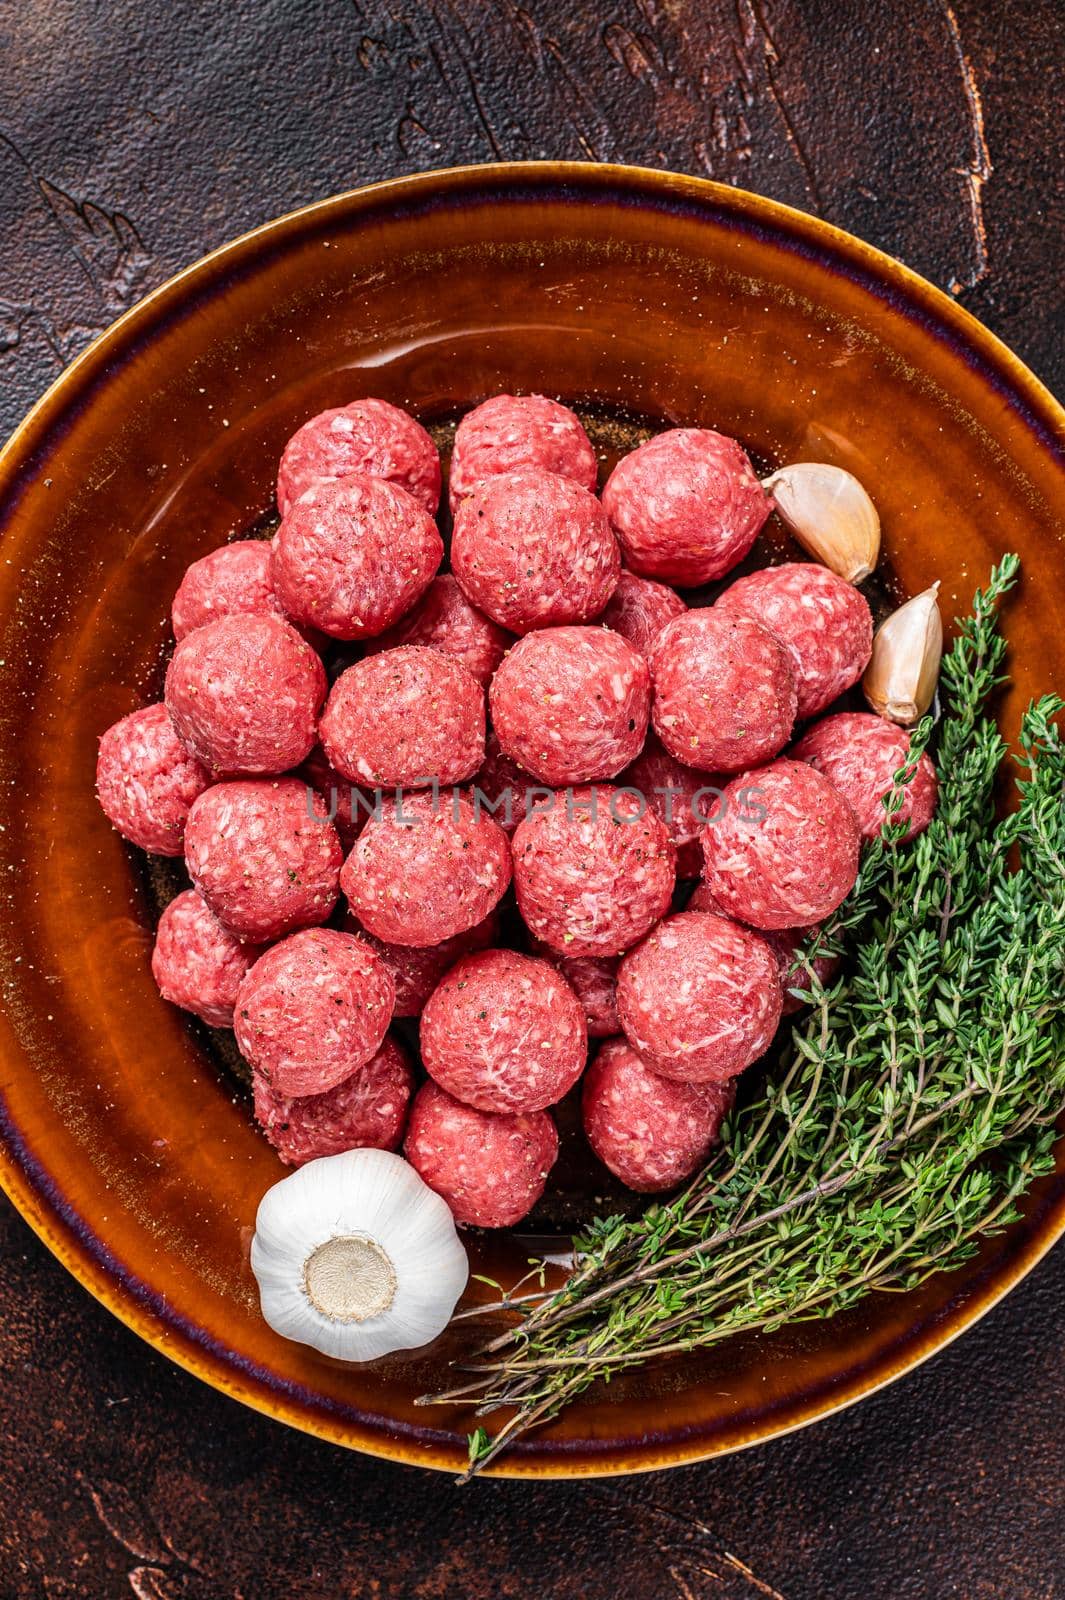 Raw meatballs from mince lamb mutton meat with thyme on rustic plate. Dark background. Top view by Composter